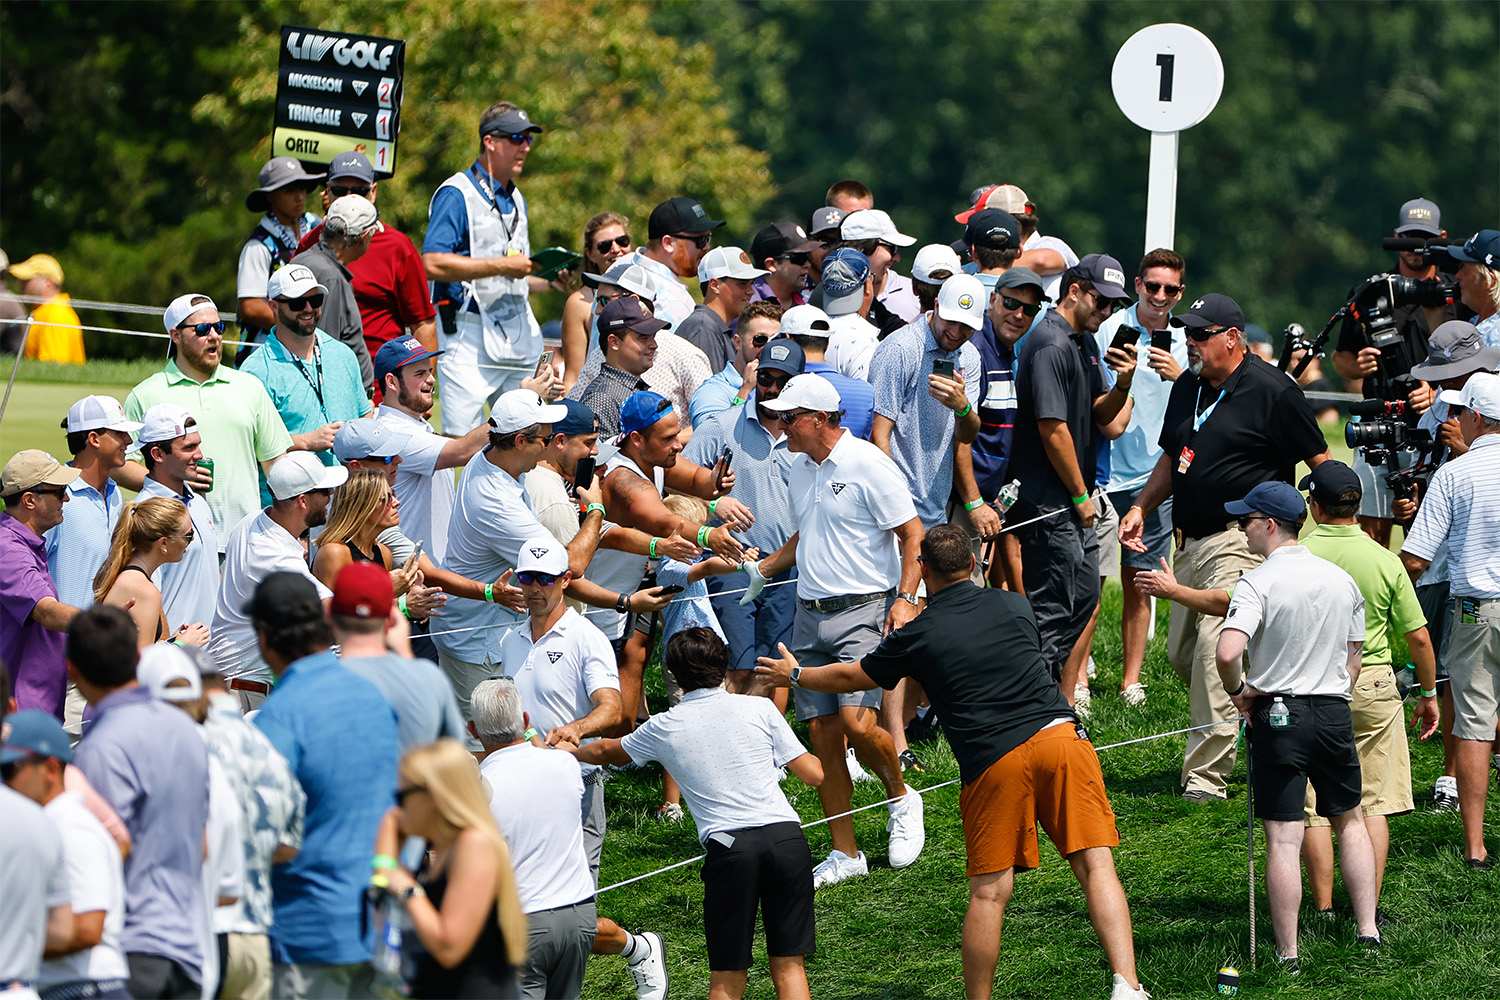 A LIV Golf player high-fives fans on the side of the course.